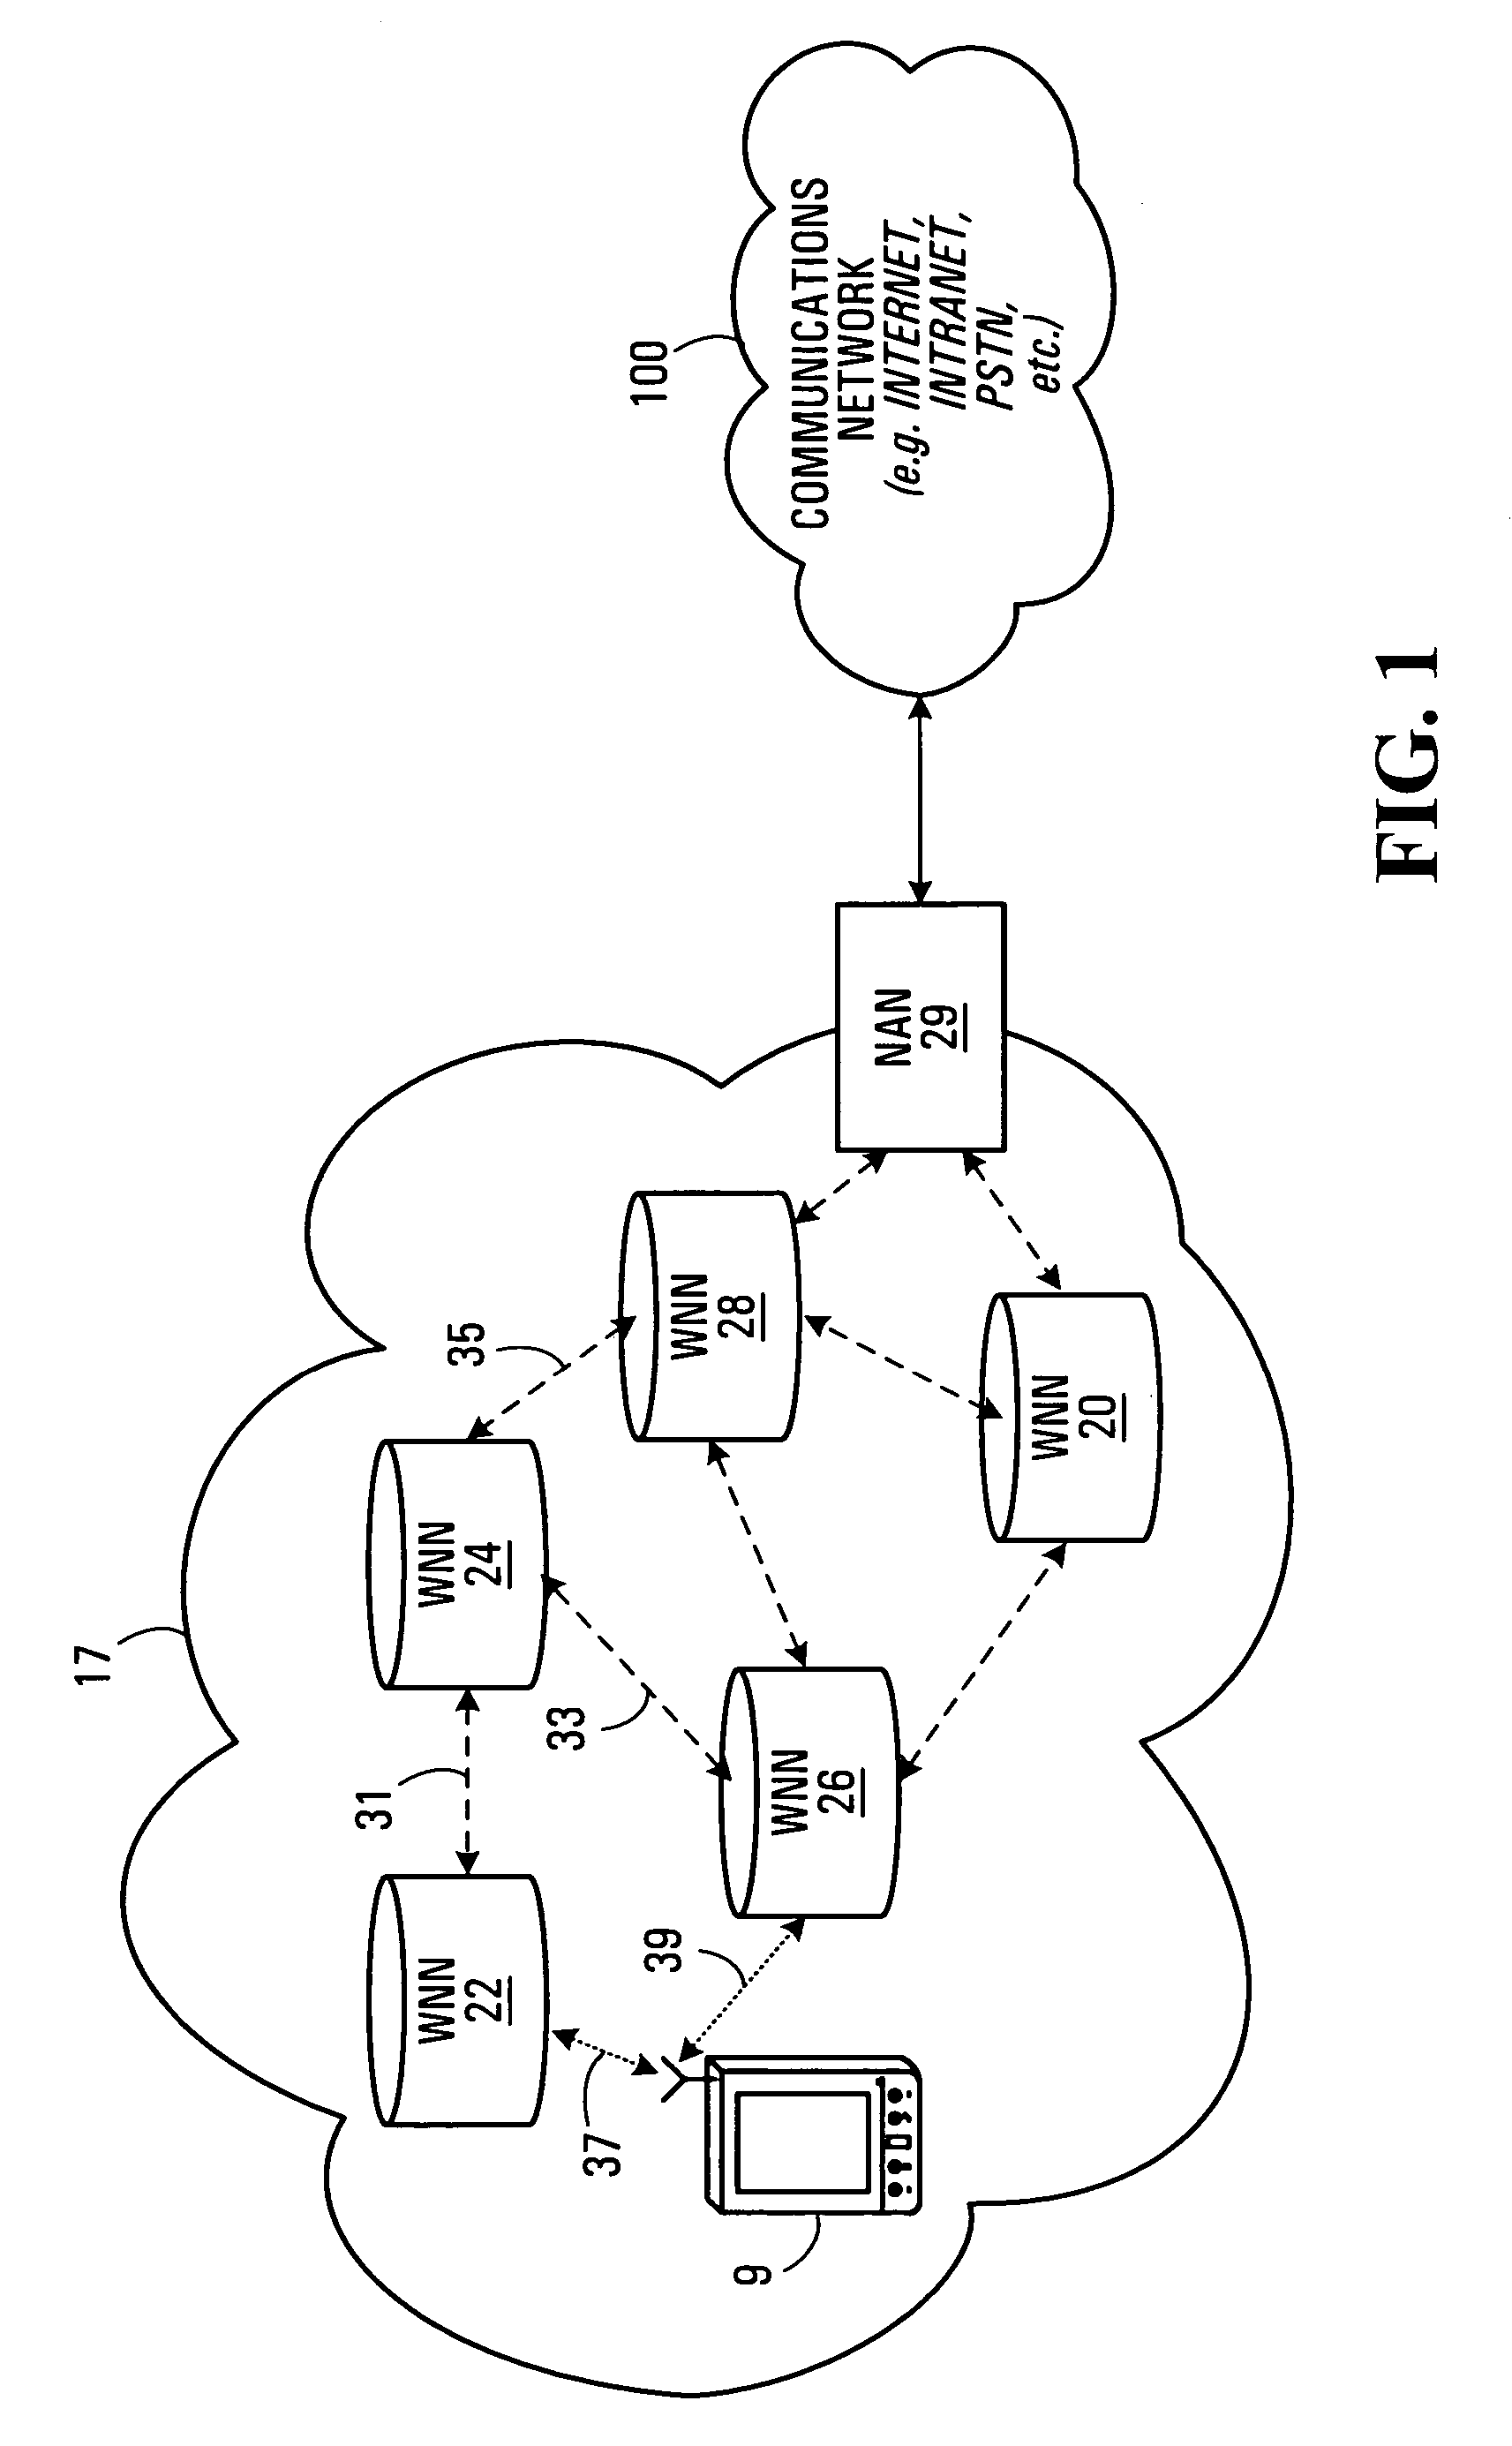 Method, apparatus and system of configuring a wireless device based on location